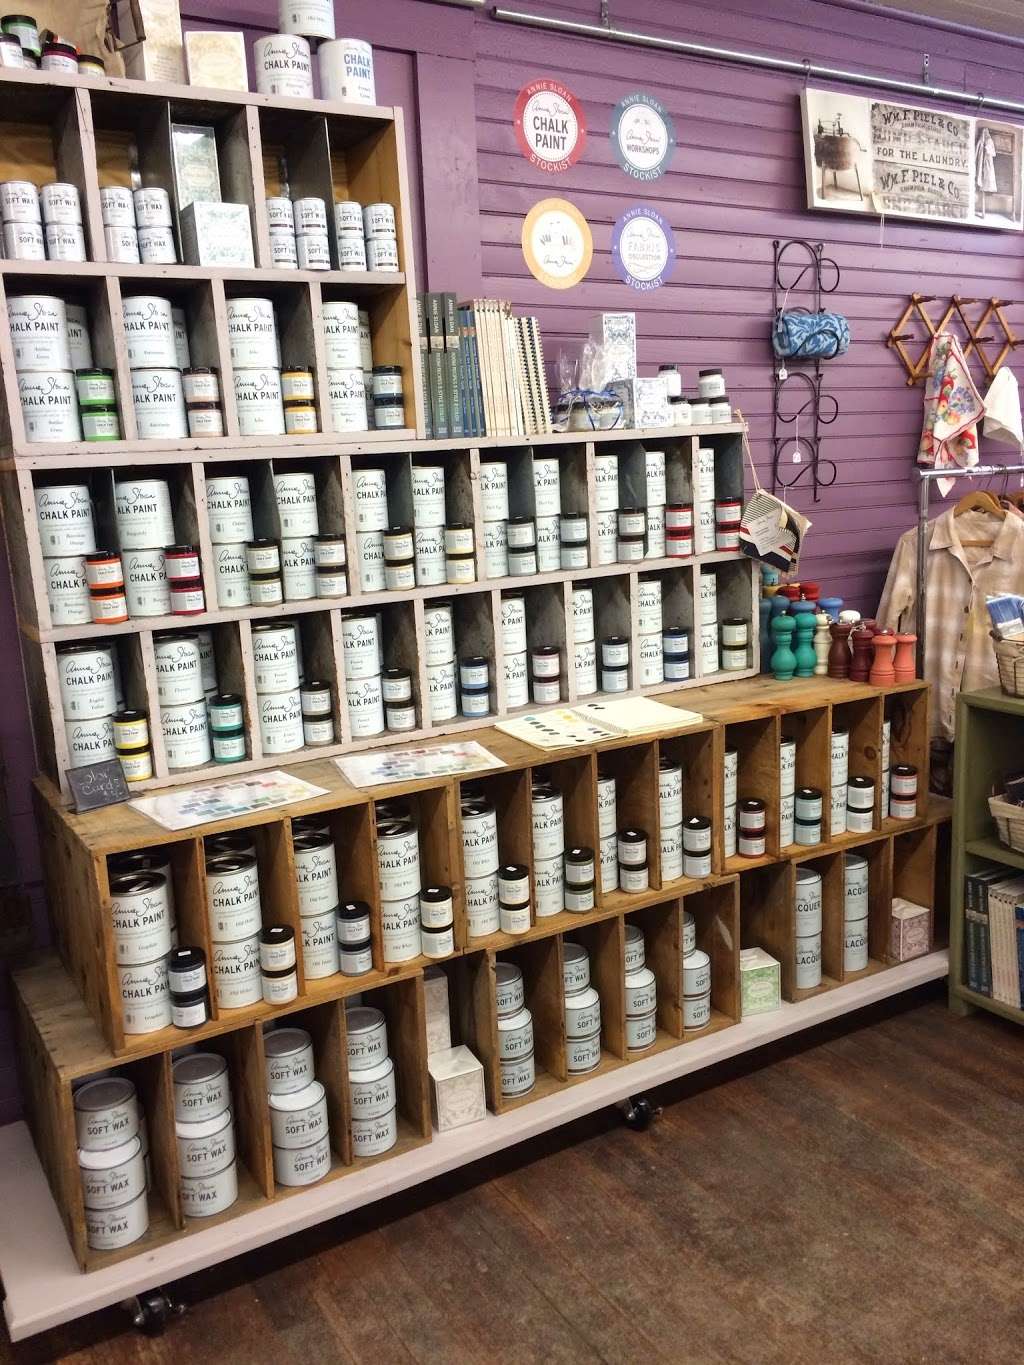 Paint Rust and Pixie Dust | 14 Center St, North Easton, MA 02356 | Phone: (508) 297-0504